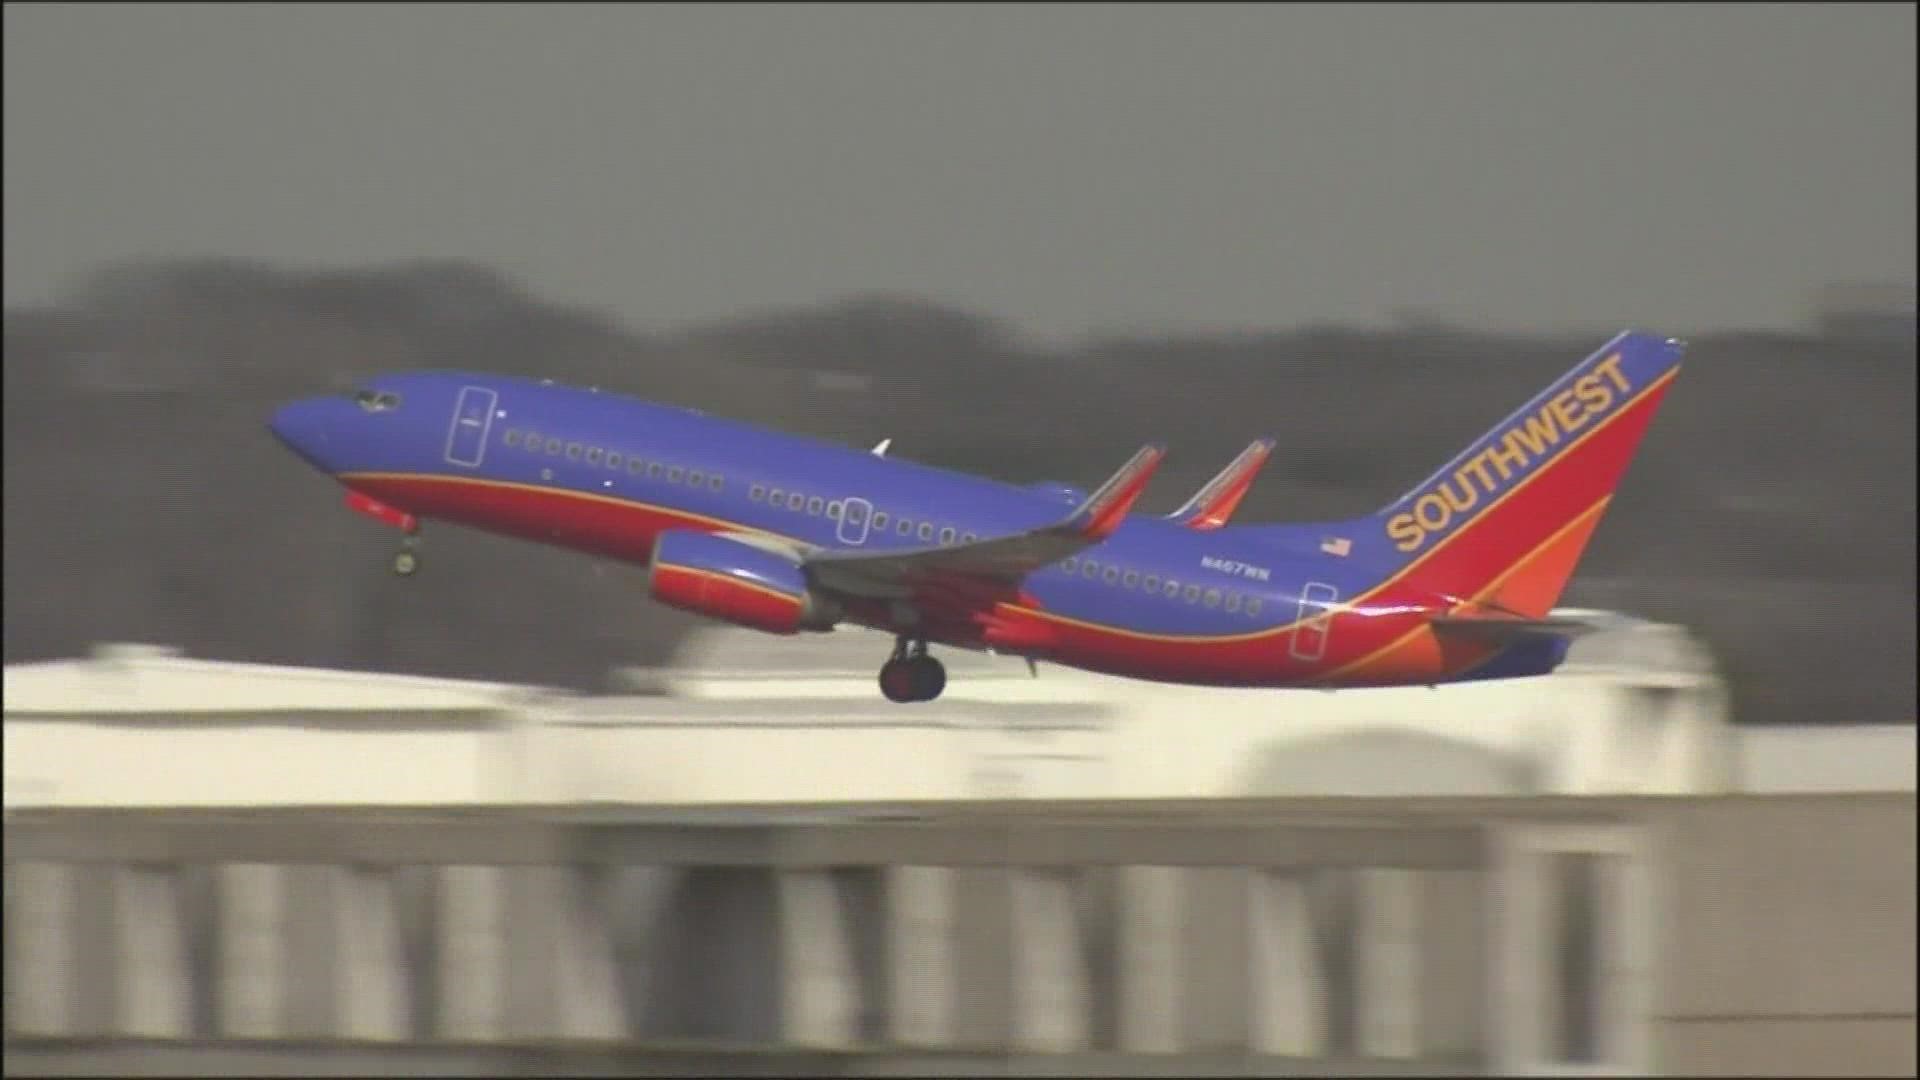 The Dallas-based airline posted a loss during its Q3 earnings report Thursday.